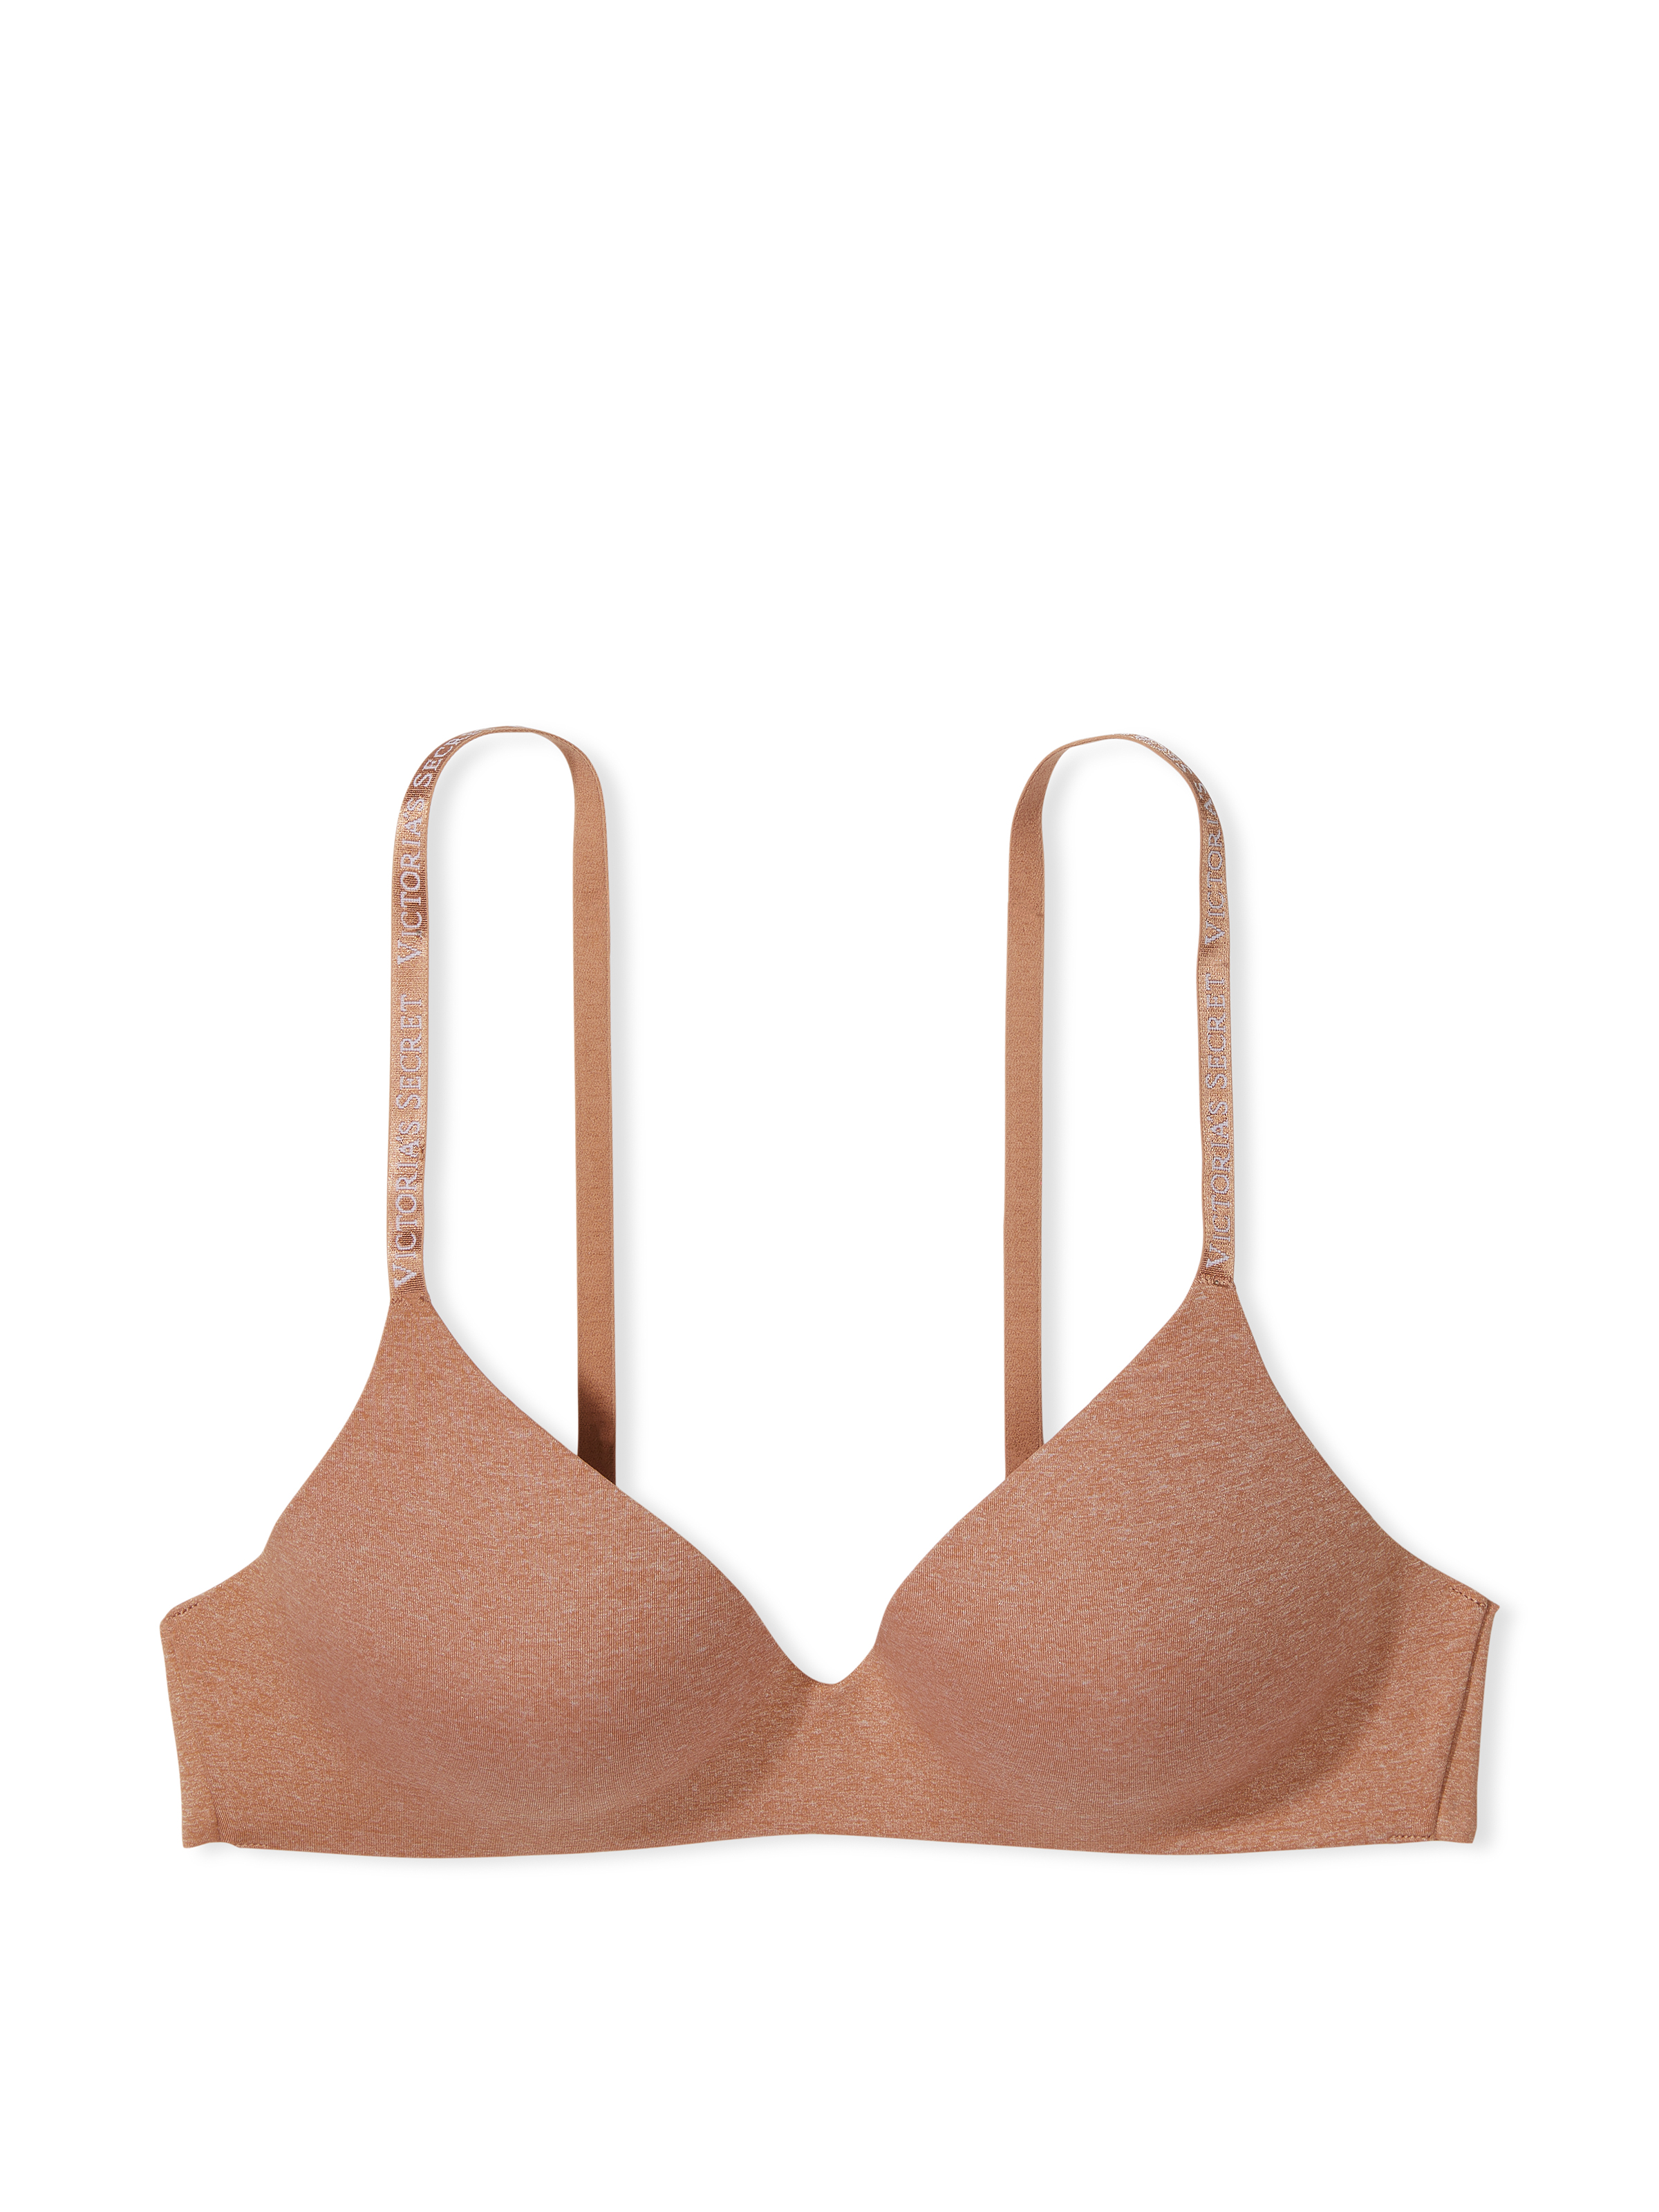 T-Shirt Lightly Lined Lounge Bra - The T-shirt - vs - Victoria's